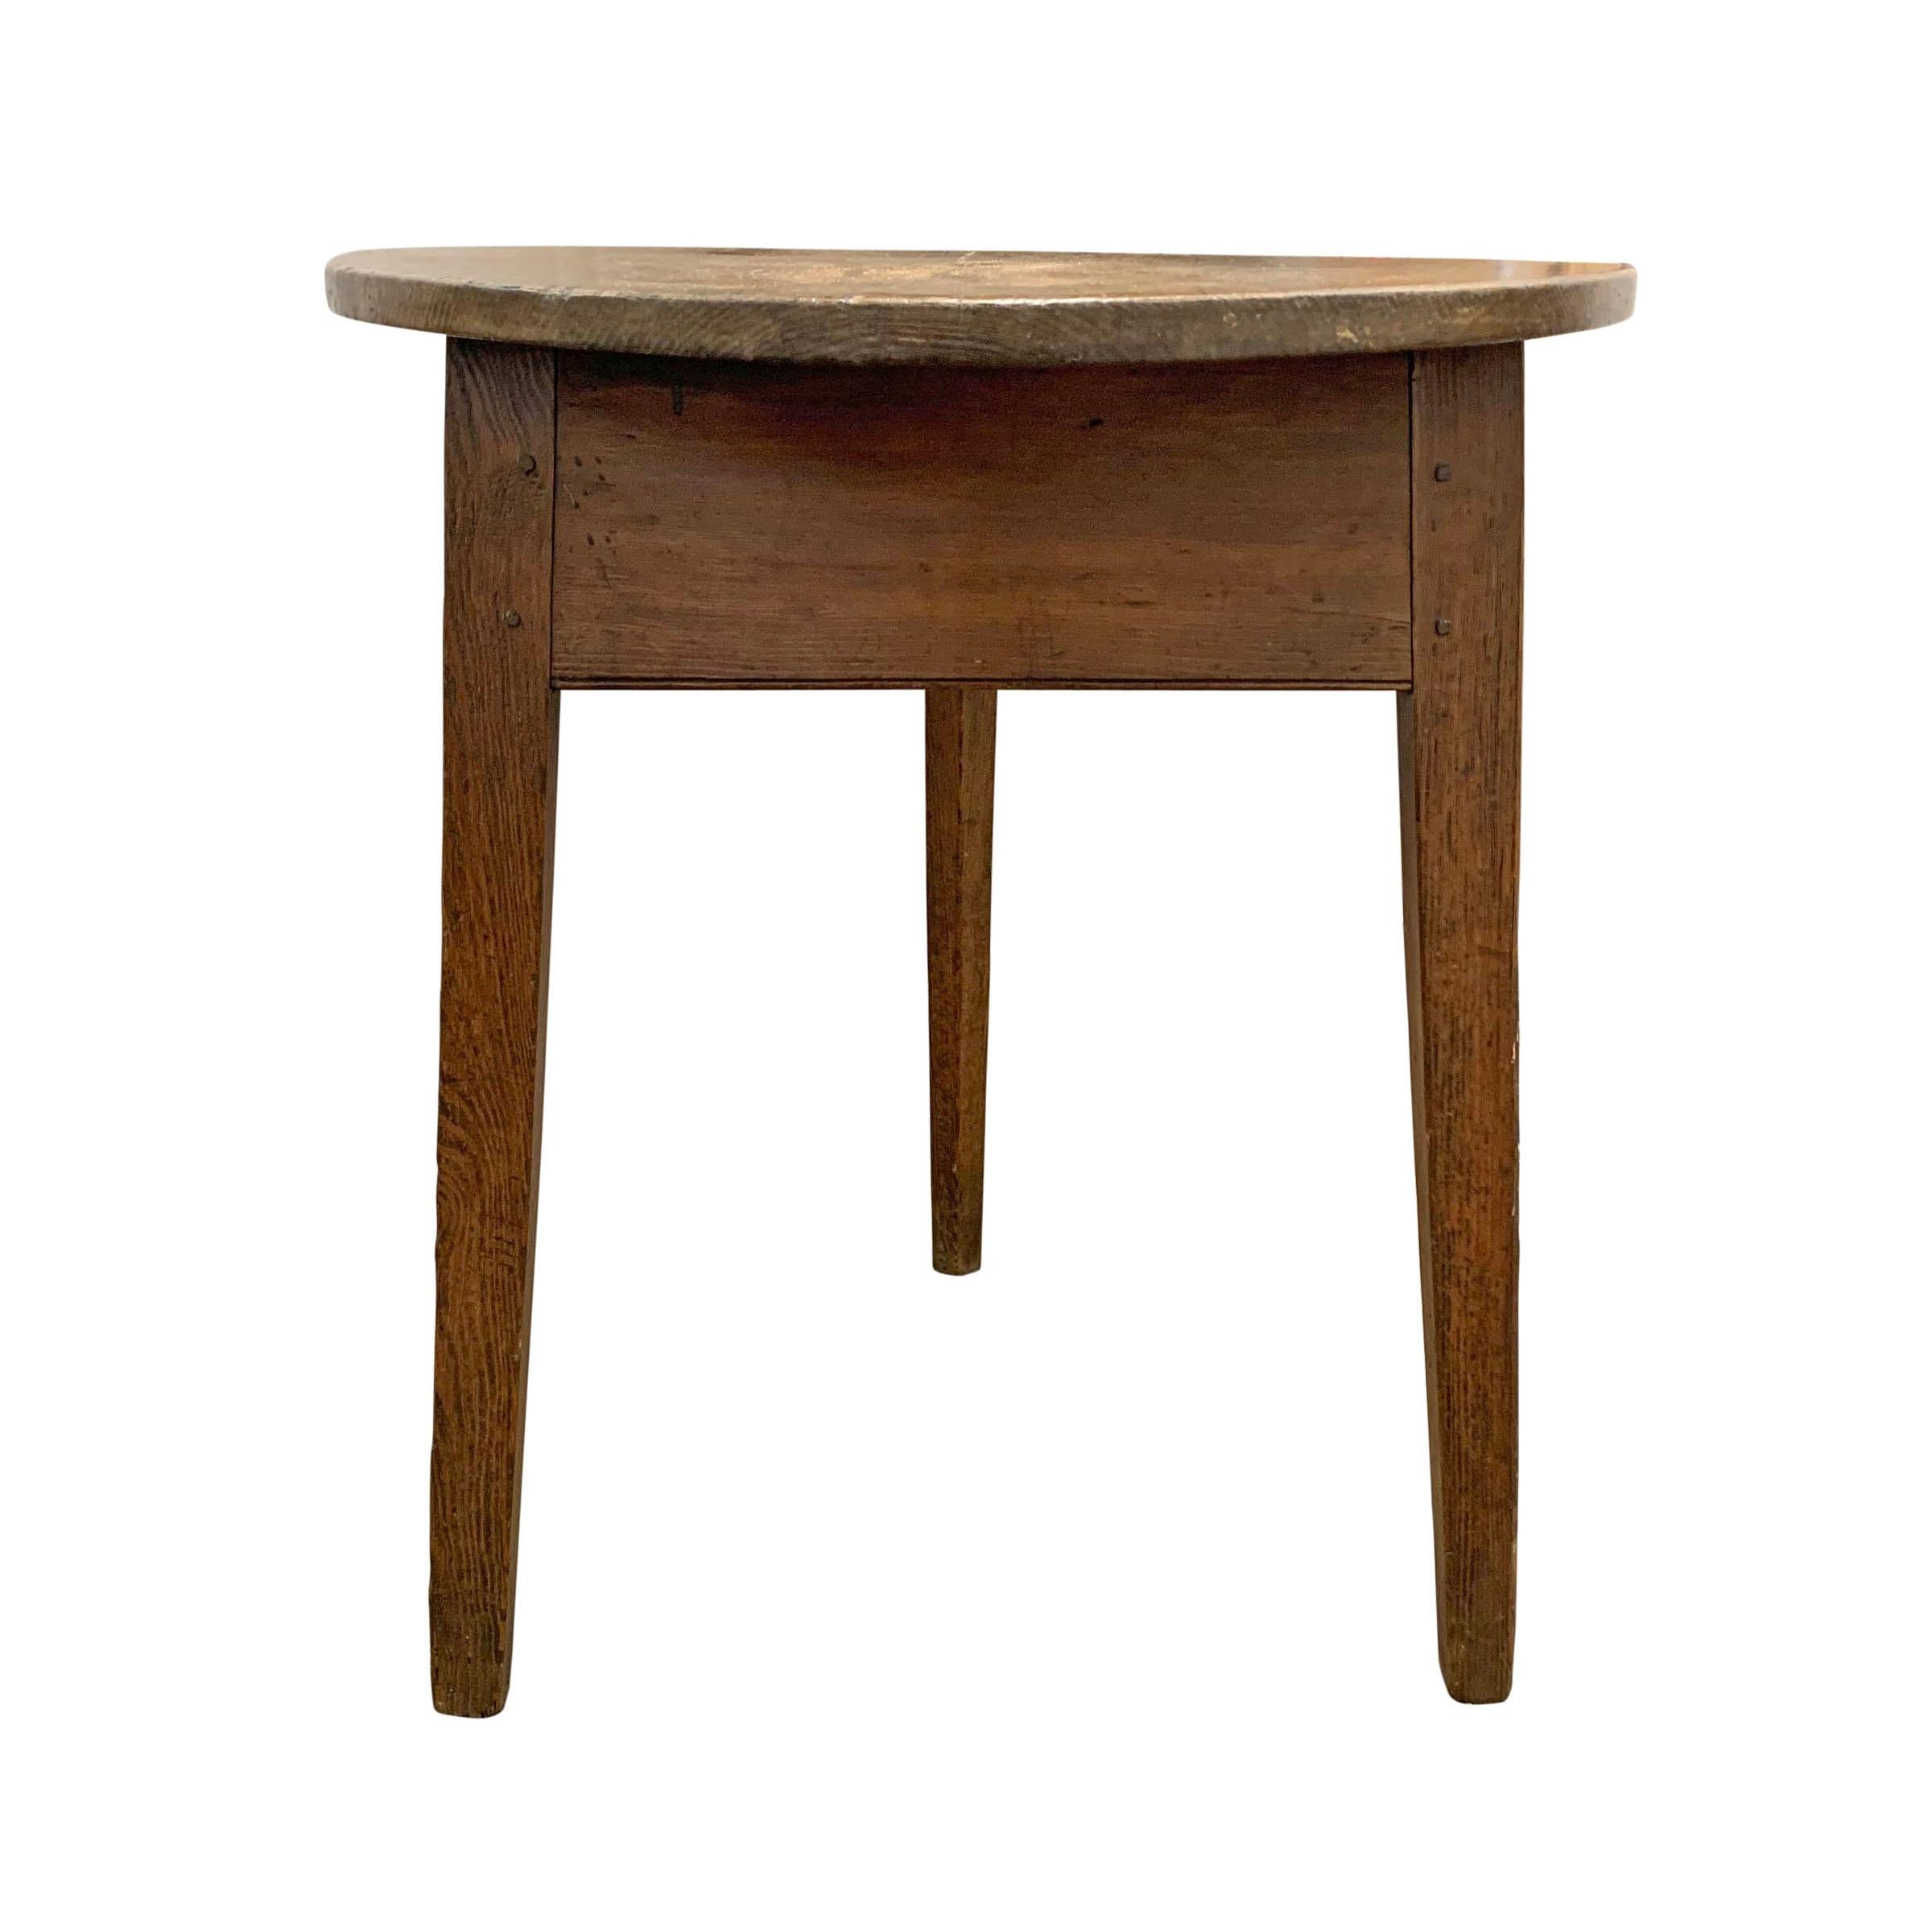 A quaint early 19th century English pine cricket table with three tapered legs, a simple apron, and a solid pine top. A gorgeous old iron strap repair with hammered rivets is on one of the corners, and we think it's perfect!